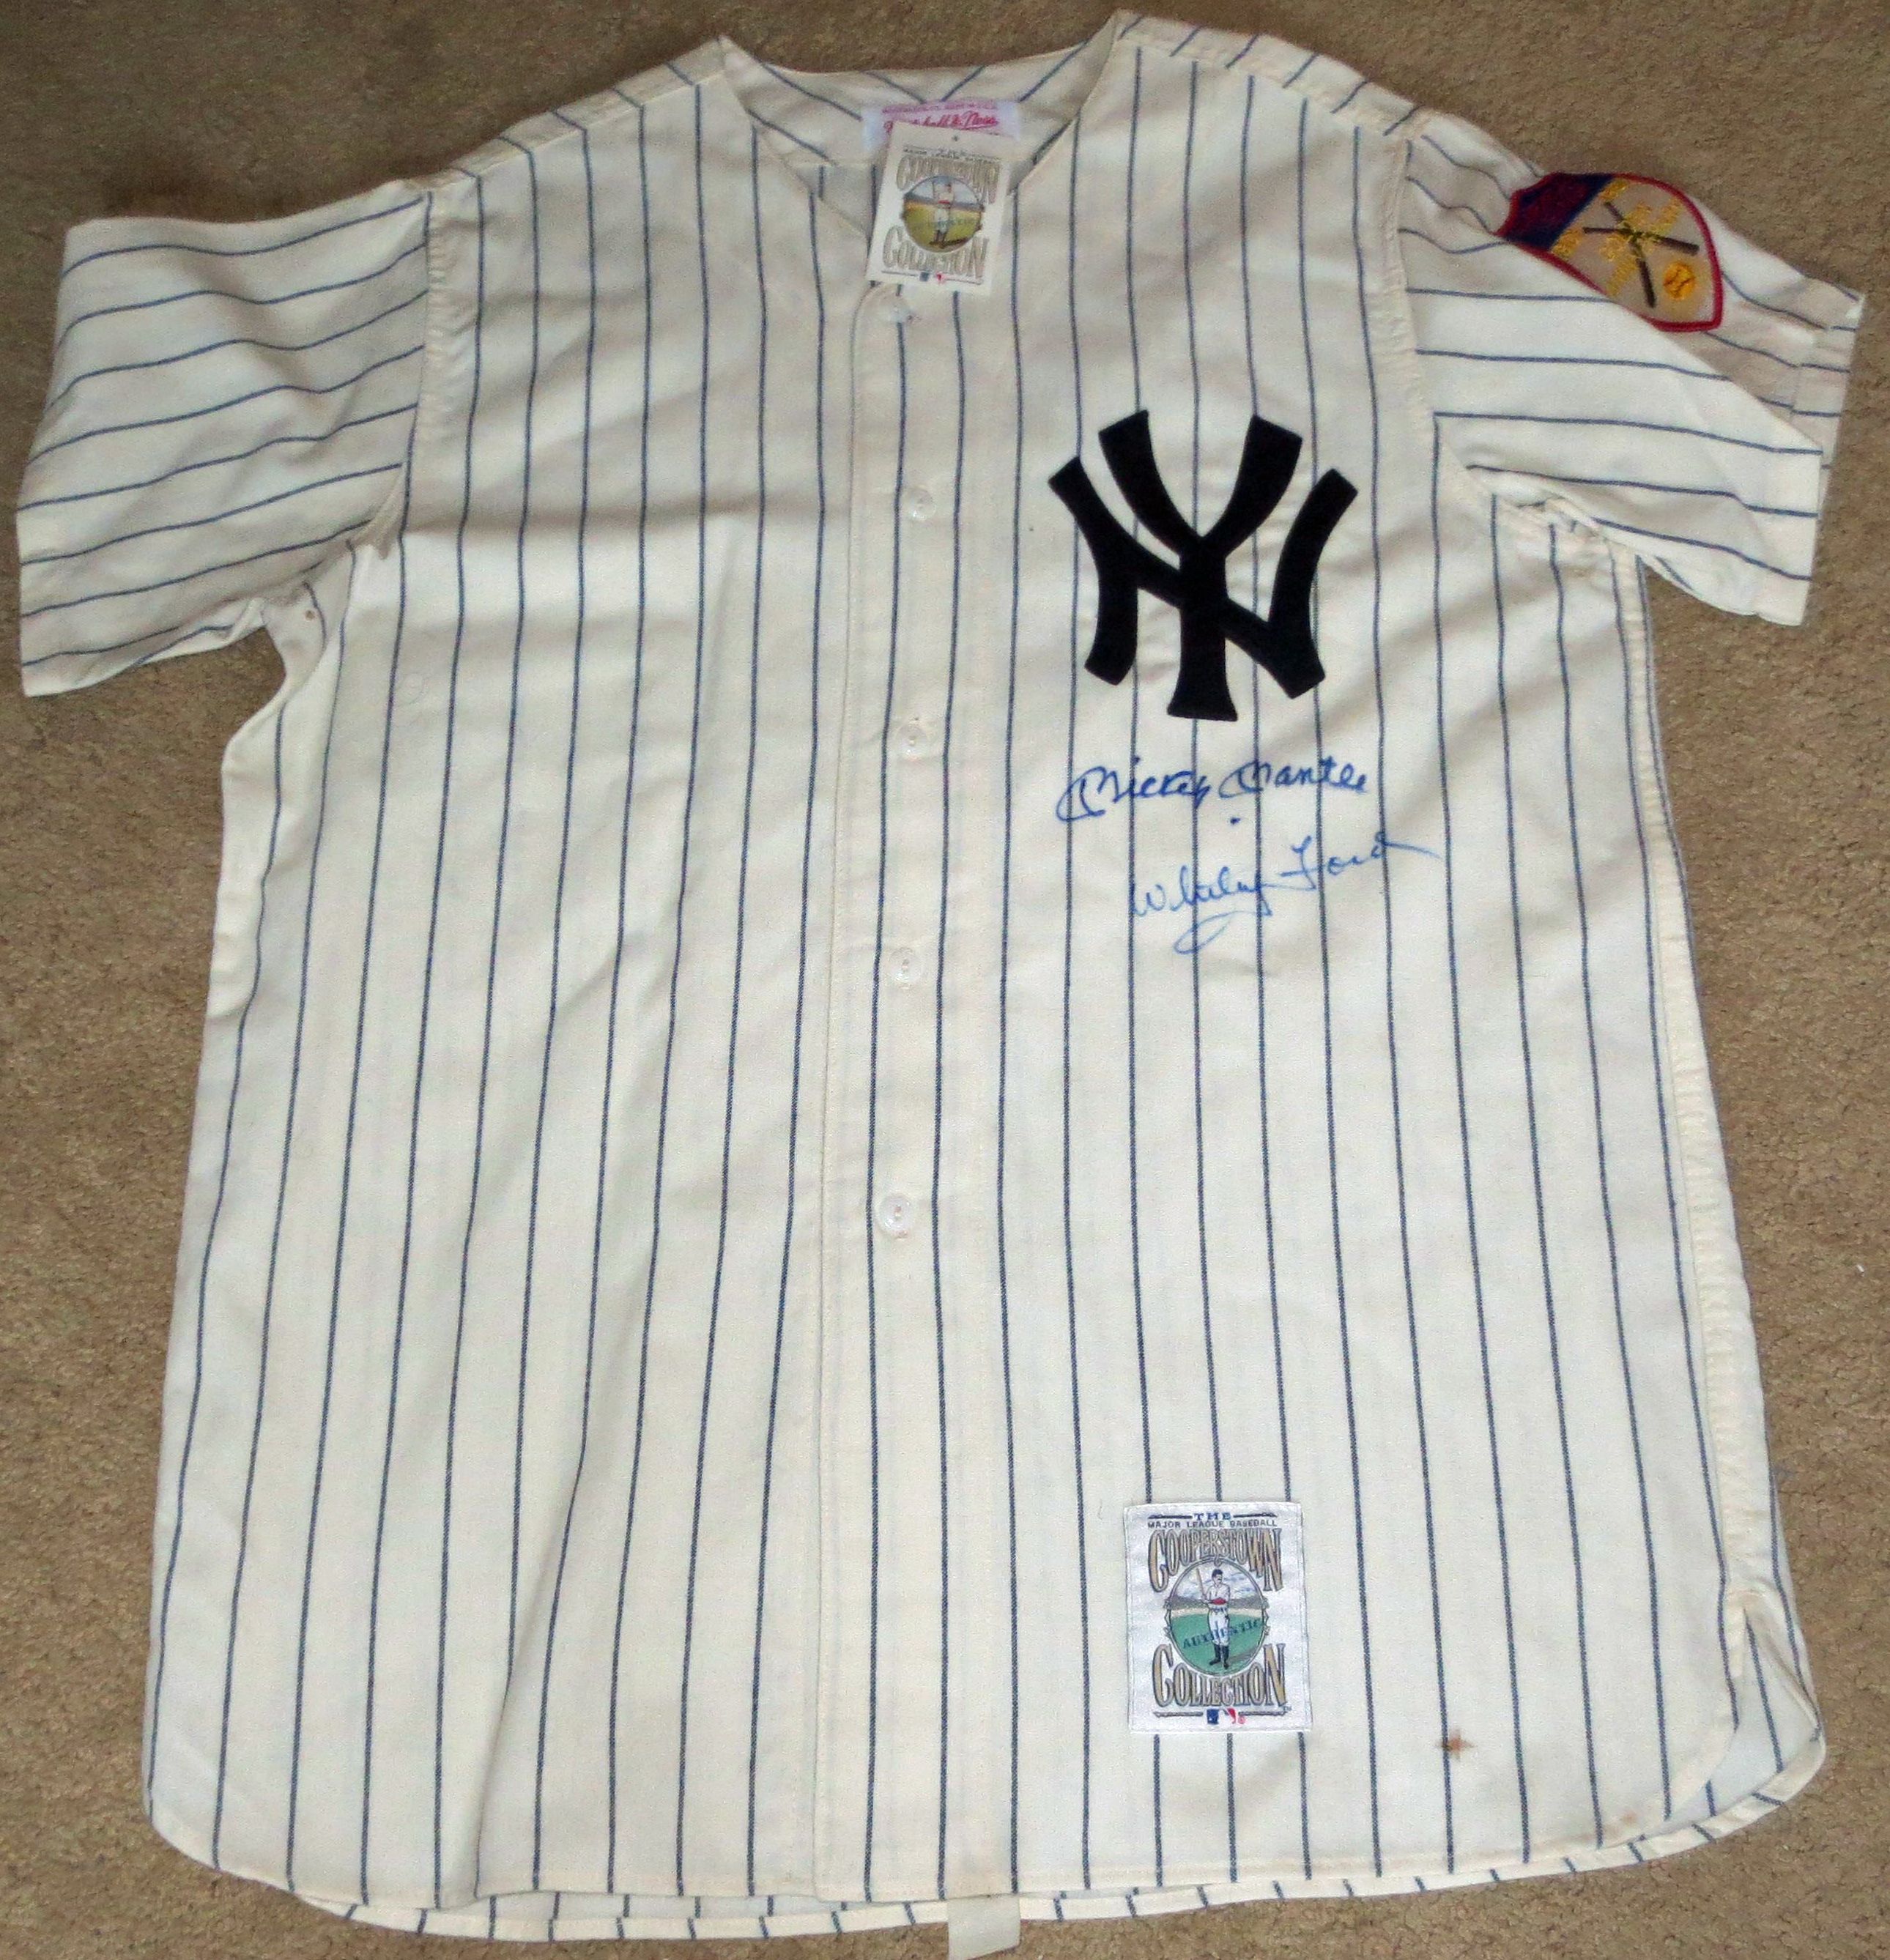 Mitchell and ness whitey ford jersey #2